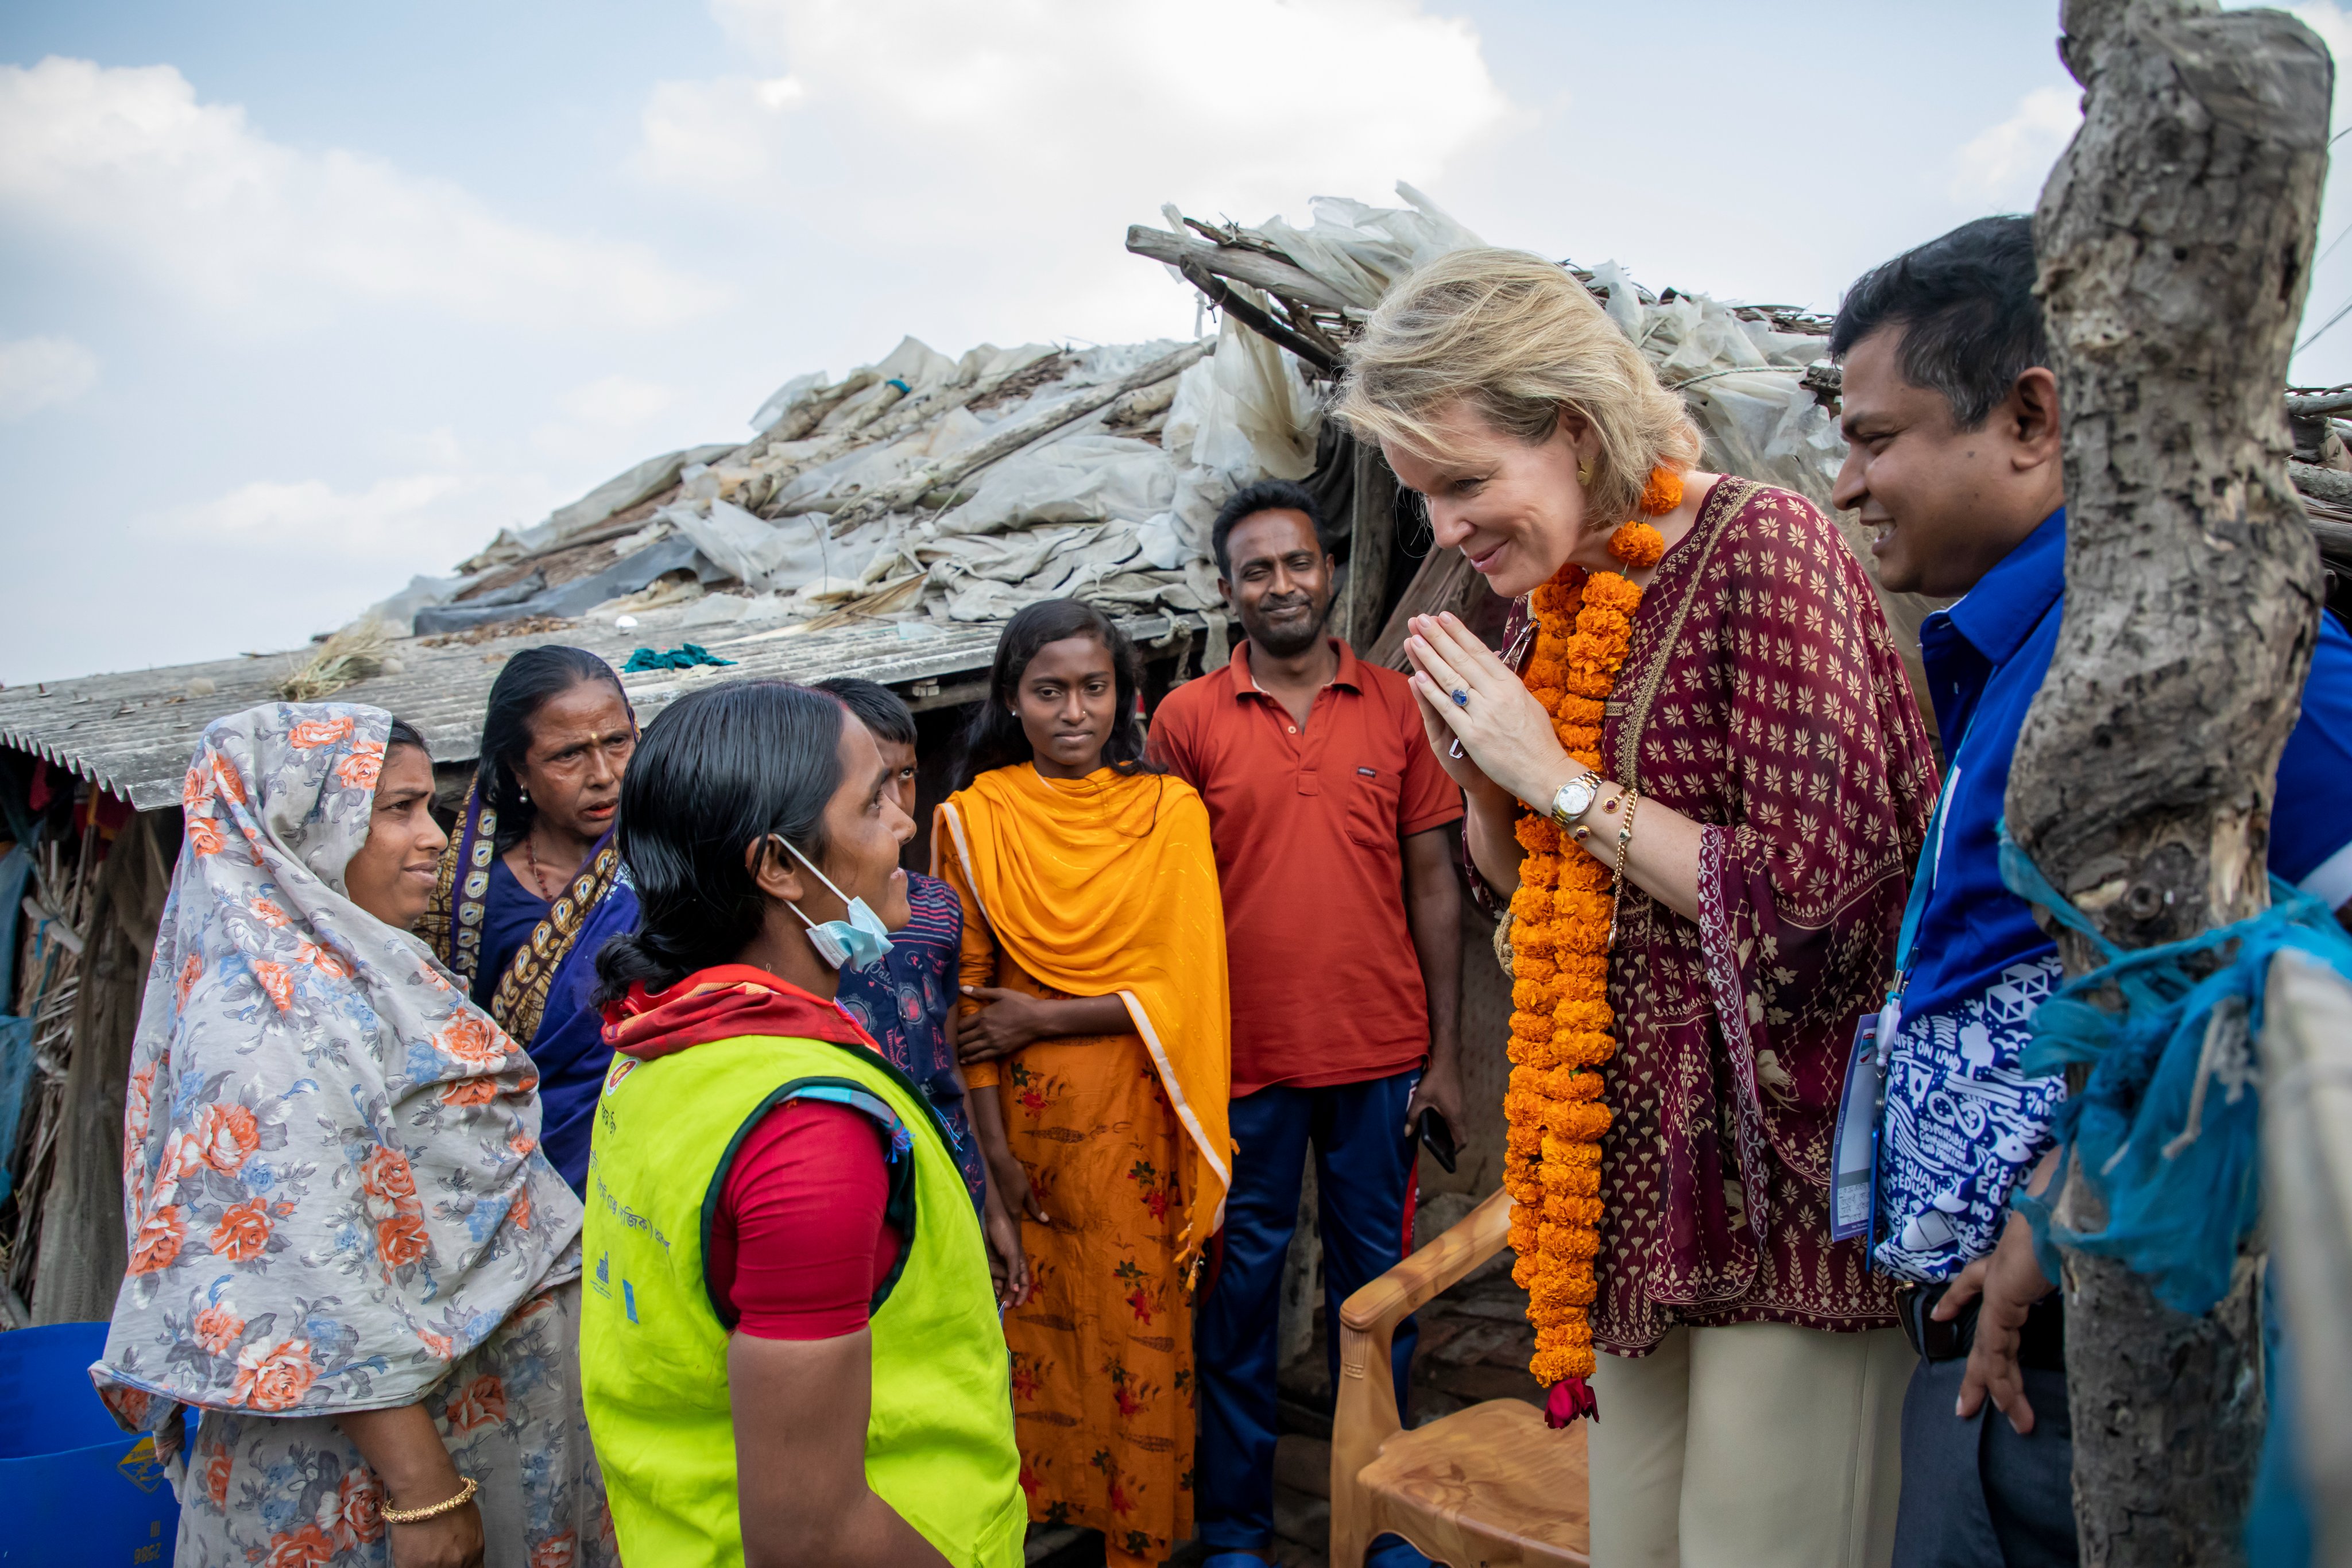 HM Queen Mathilde of Belgium with local residents of the Khulna region in Bangladesh